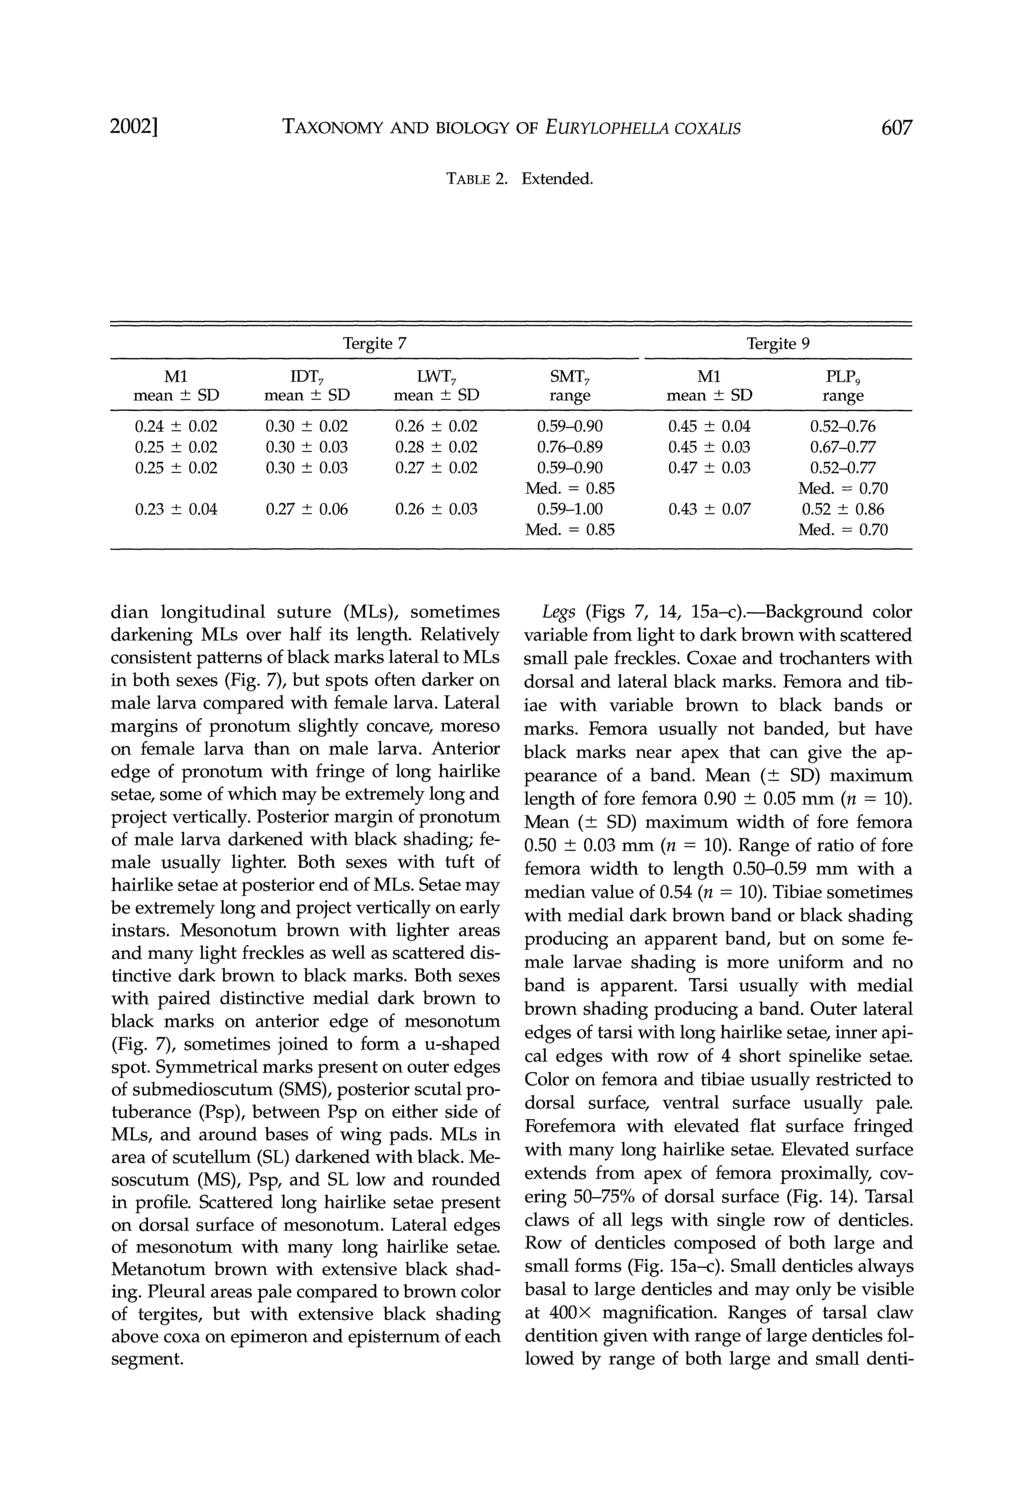 2002] TAXONOMY AND BIOLOGY OF EURYLOPHELLA COXAUS 607 TABLE 2. Extended. Tergite 7 Ml ldt7 LWT 7 mean± SD mean± SD mean± SD 0.24 ± 0.02 0.30 ± 0.02 0.26 ± 0.02 0.25 ± 0.02 0.30 ± 0.03 0.28 ± 0.02 0.25 ± 0.02 0.30 ± 0.03 0.27 ± 0.